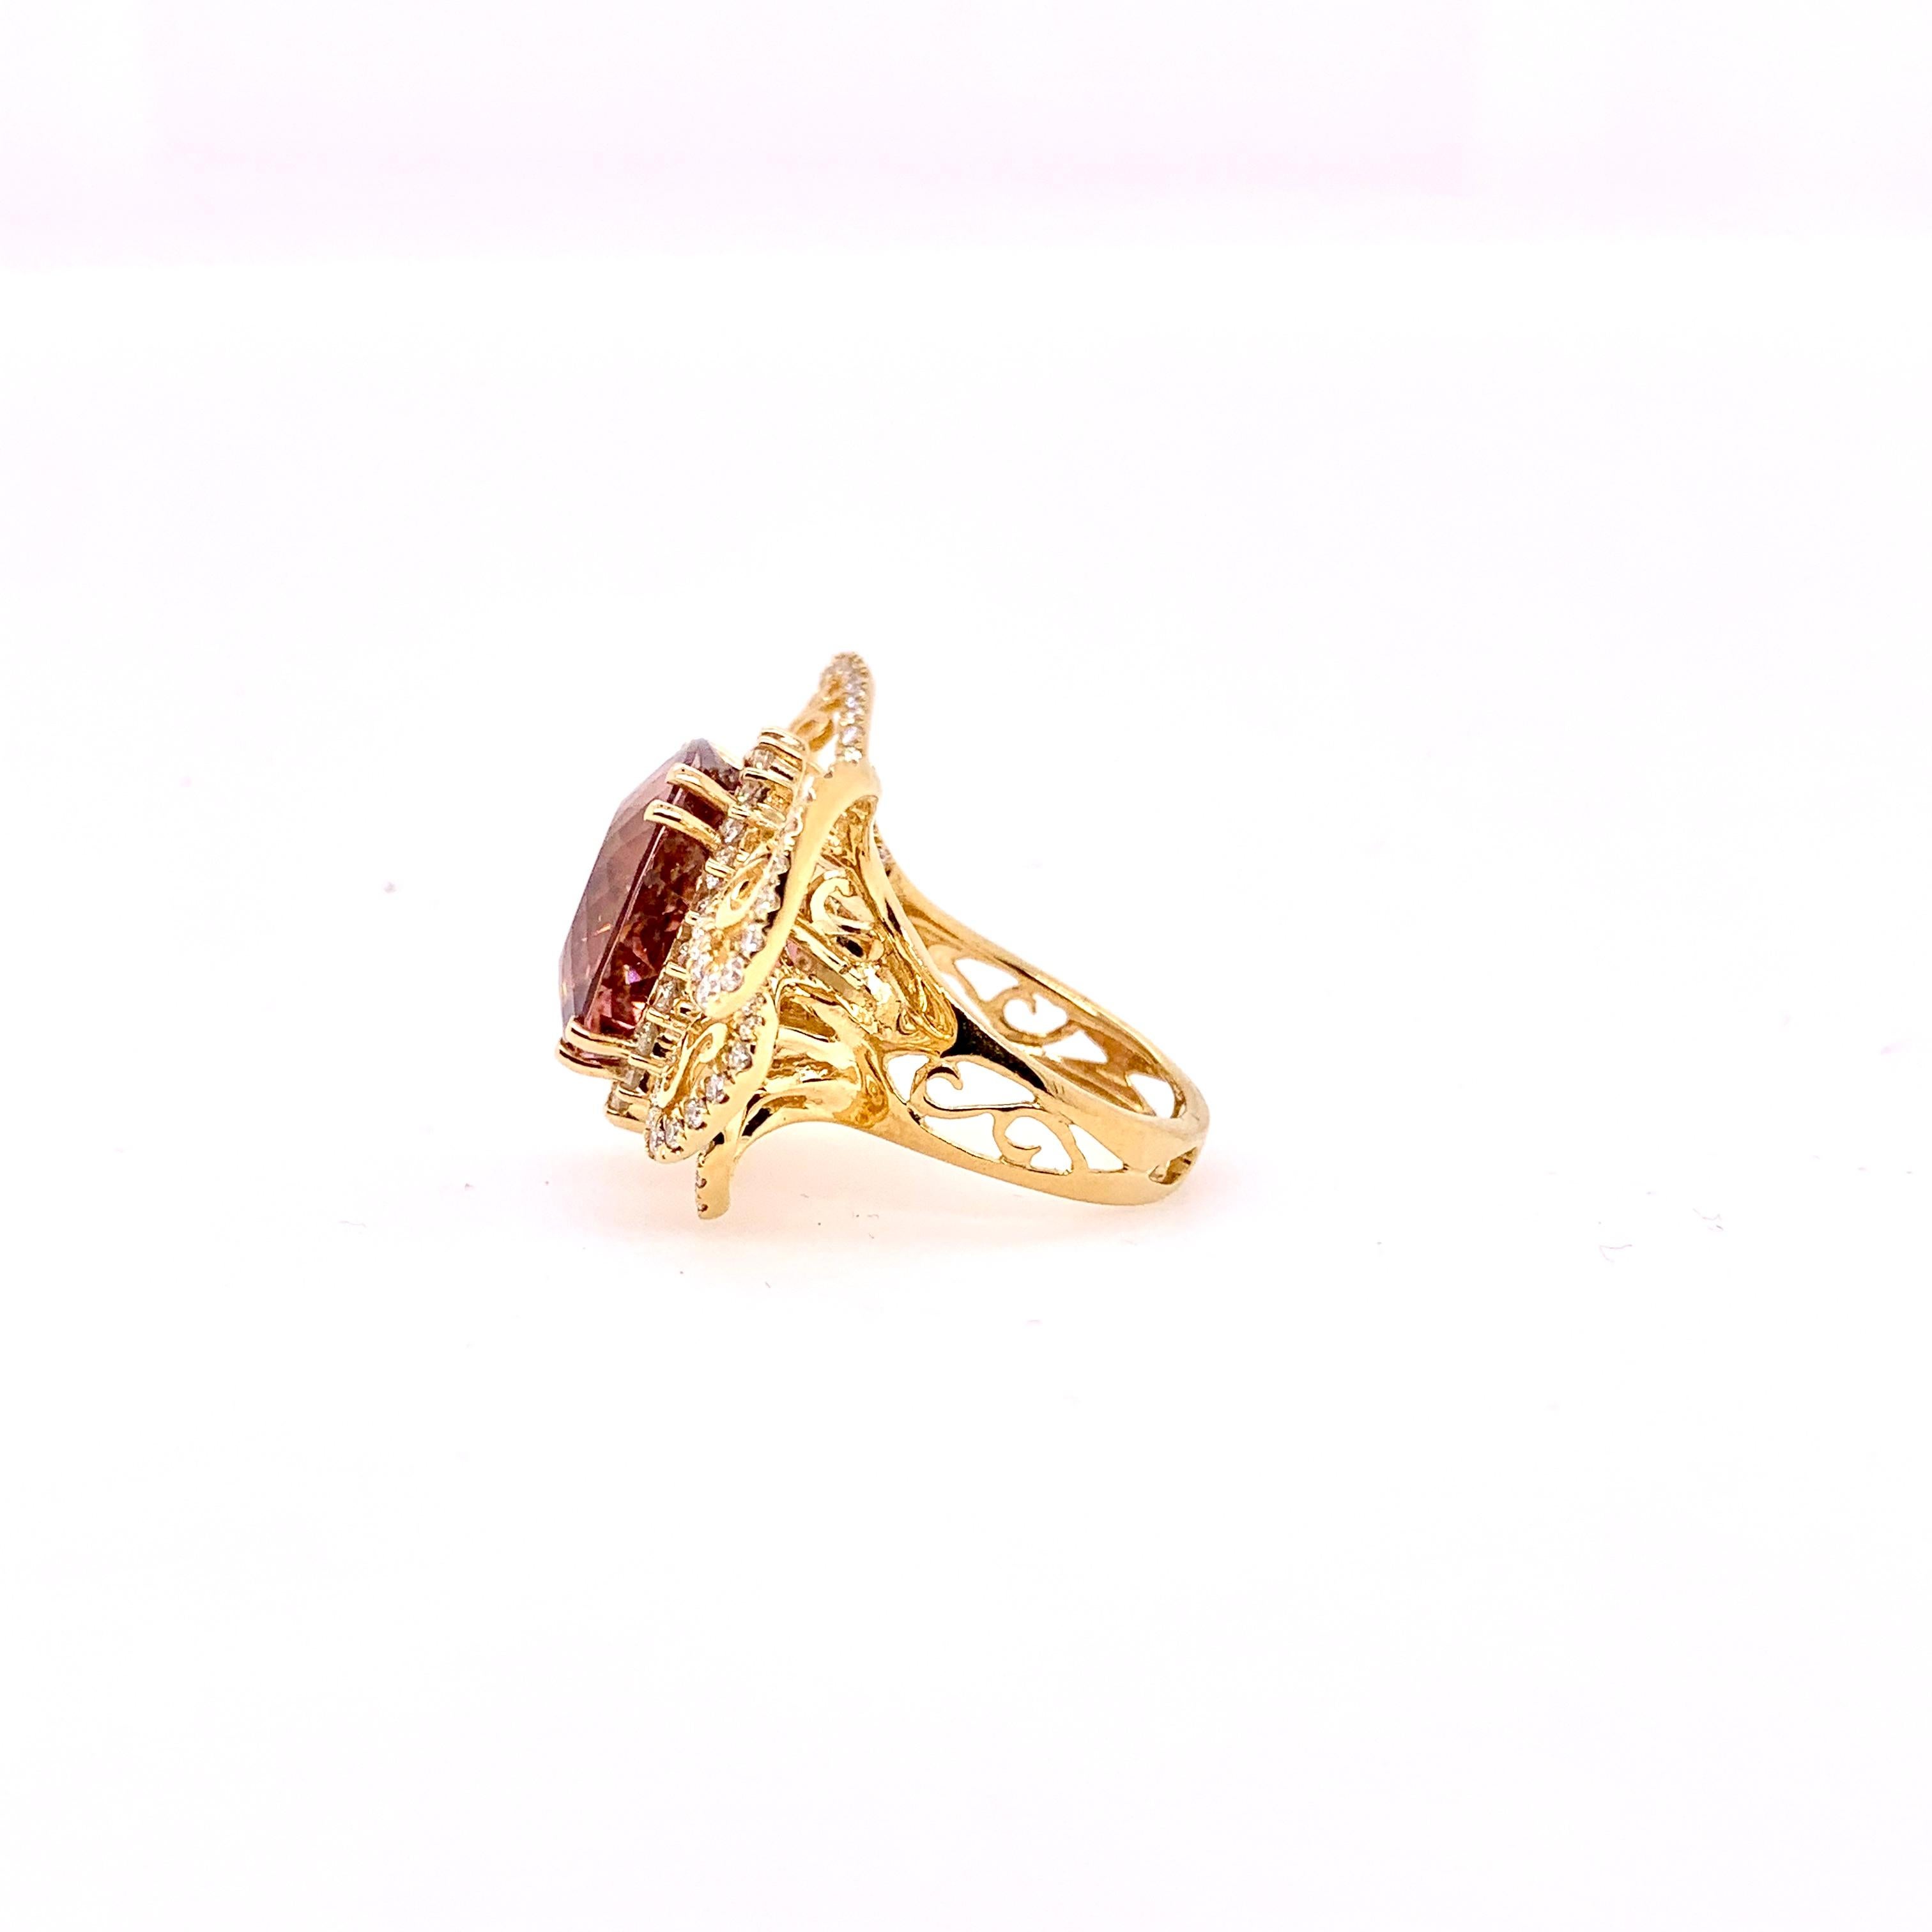 A unique approach to a pink tourmaline butterfly ring with diamonds.  Handmade with an artistic viewpoint on a more contemporary butterfly design.   The cushion cut pink tourmaline weights 14.5 cts and the round brilliant diamonds come in at 1.70